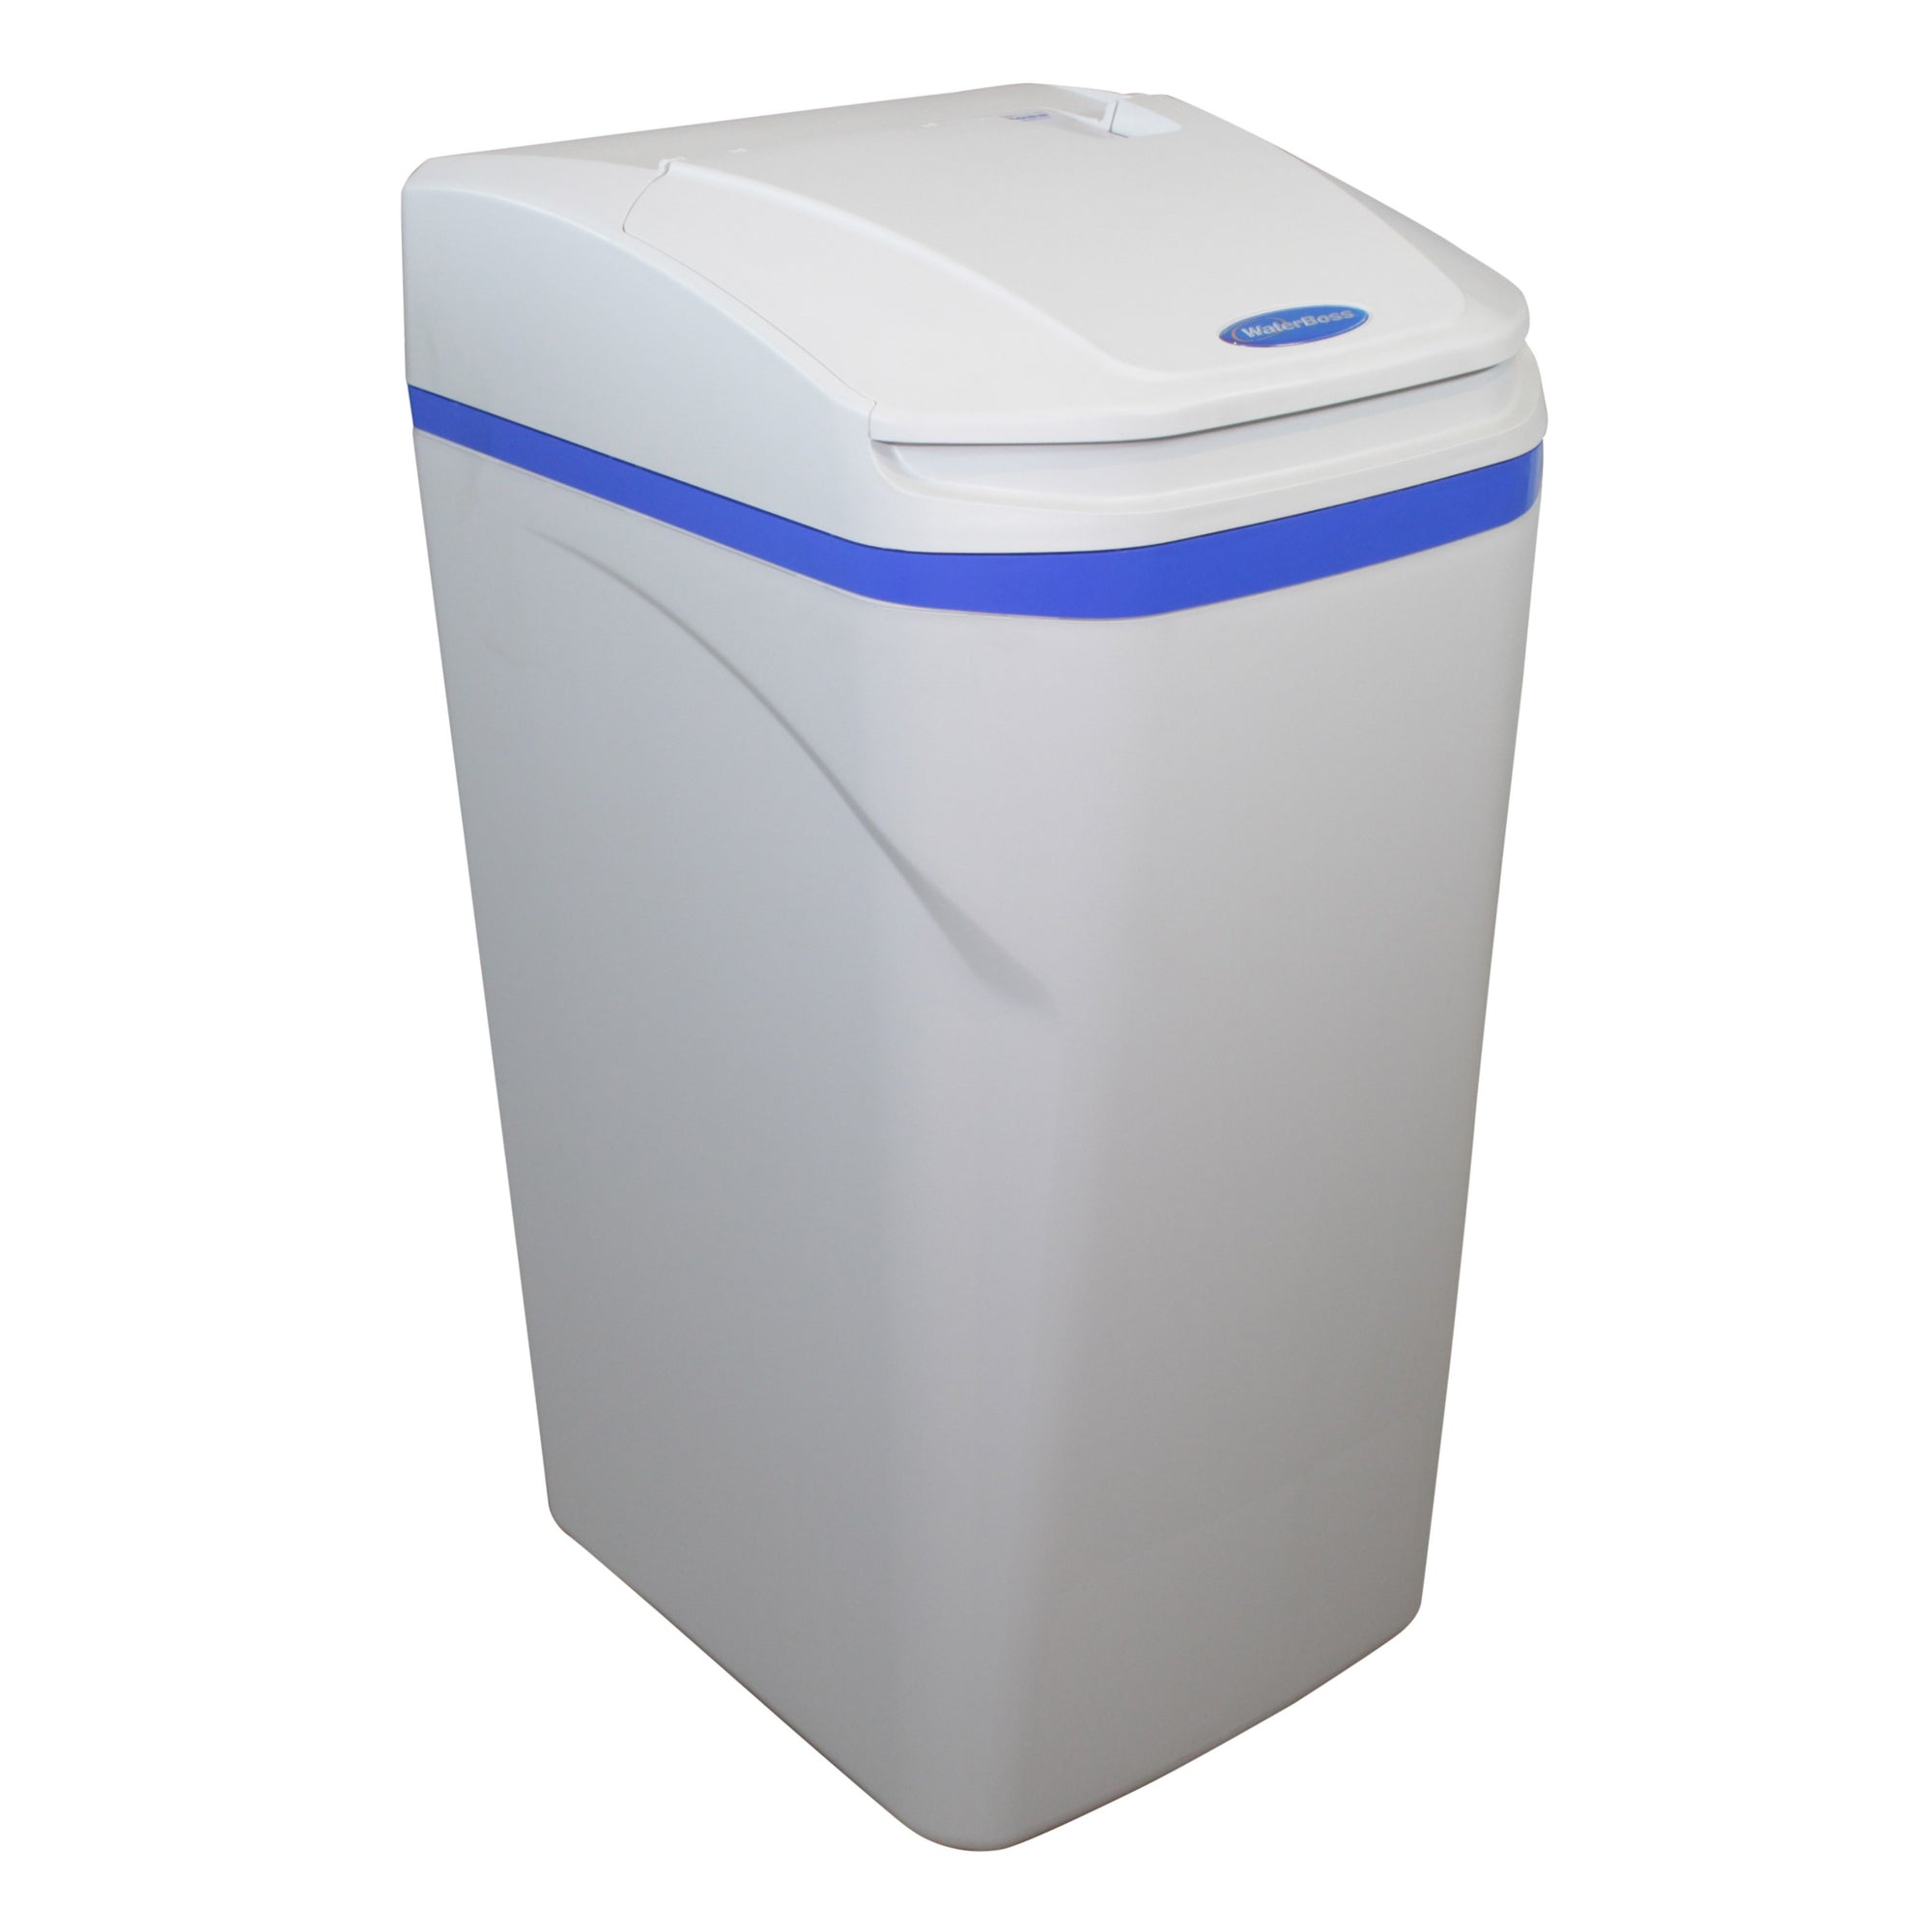 Water Softener Installation 5A – Putting WaterBoss into Service 10 Easy Steps